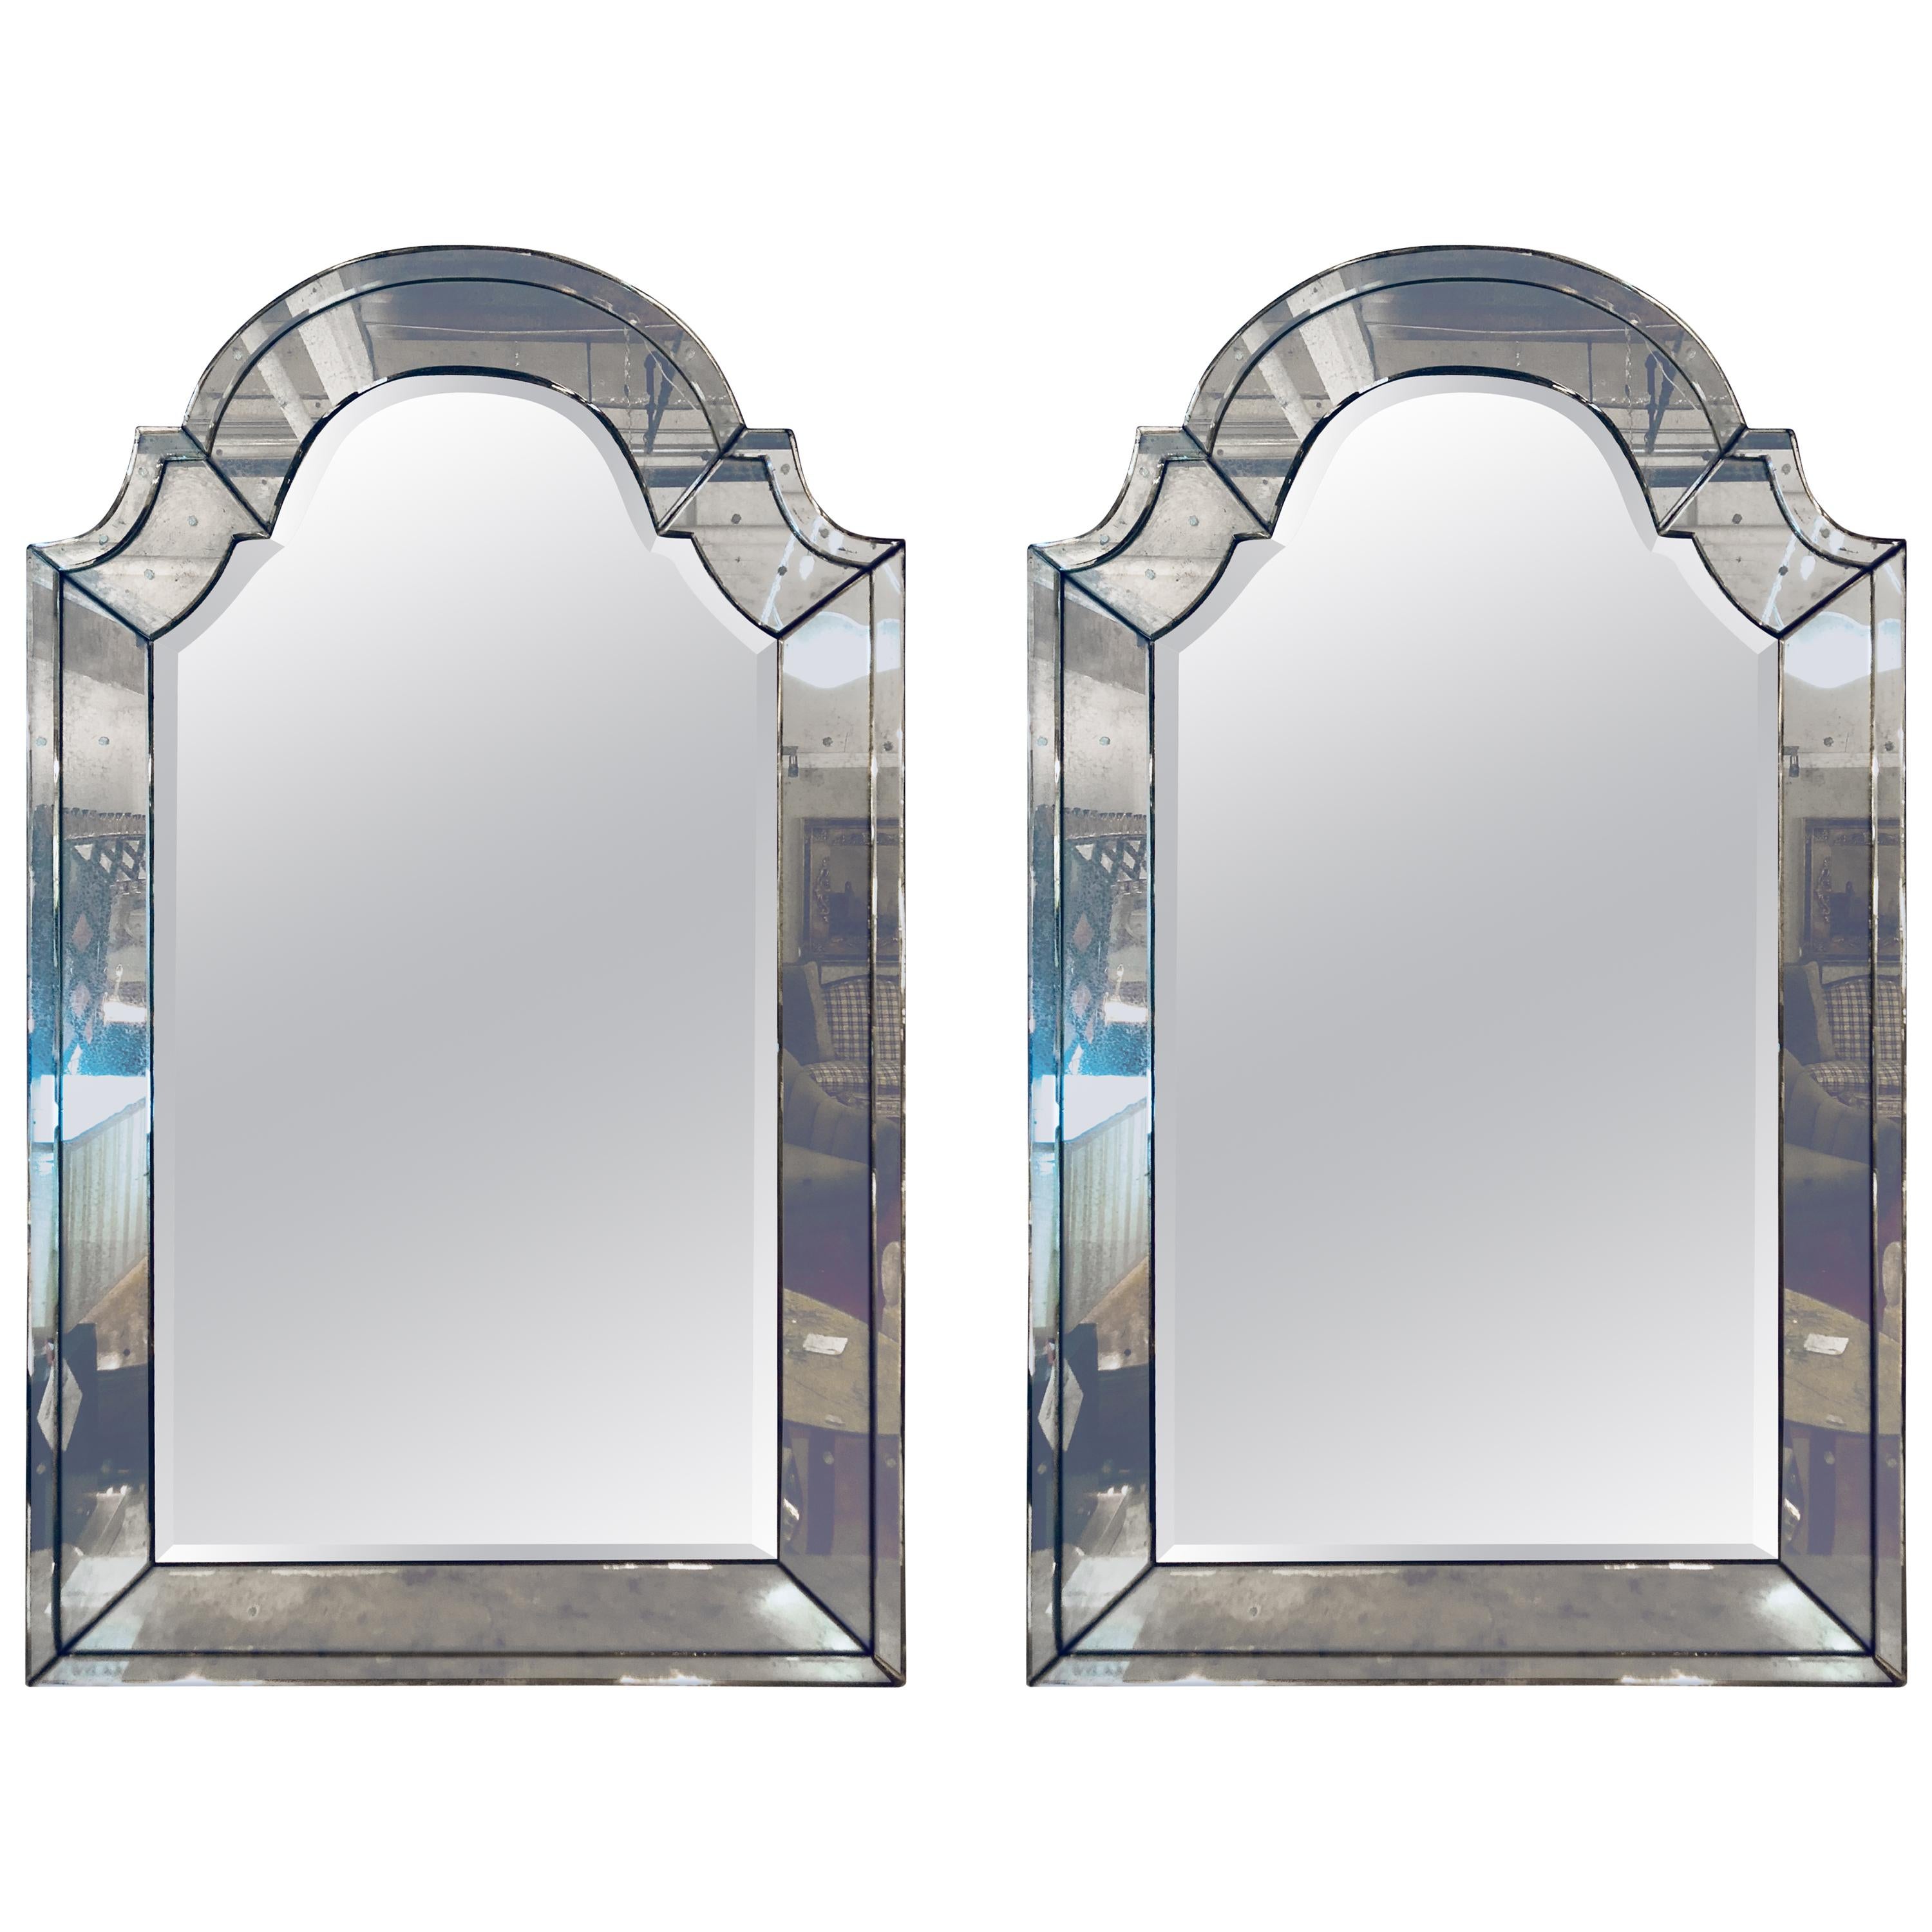 Pair of Distressed Dome Topped Classic Antiqued Pier Mirrors